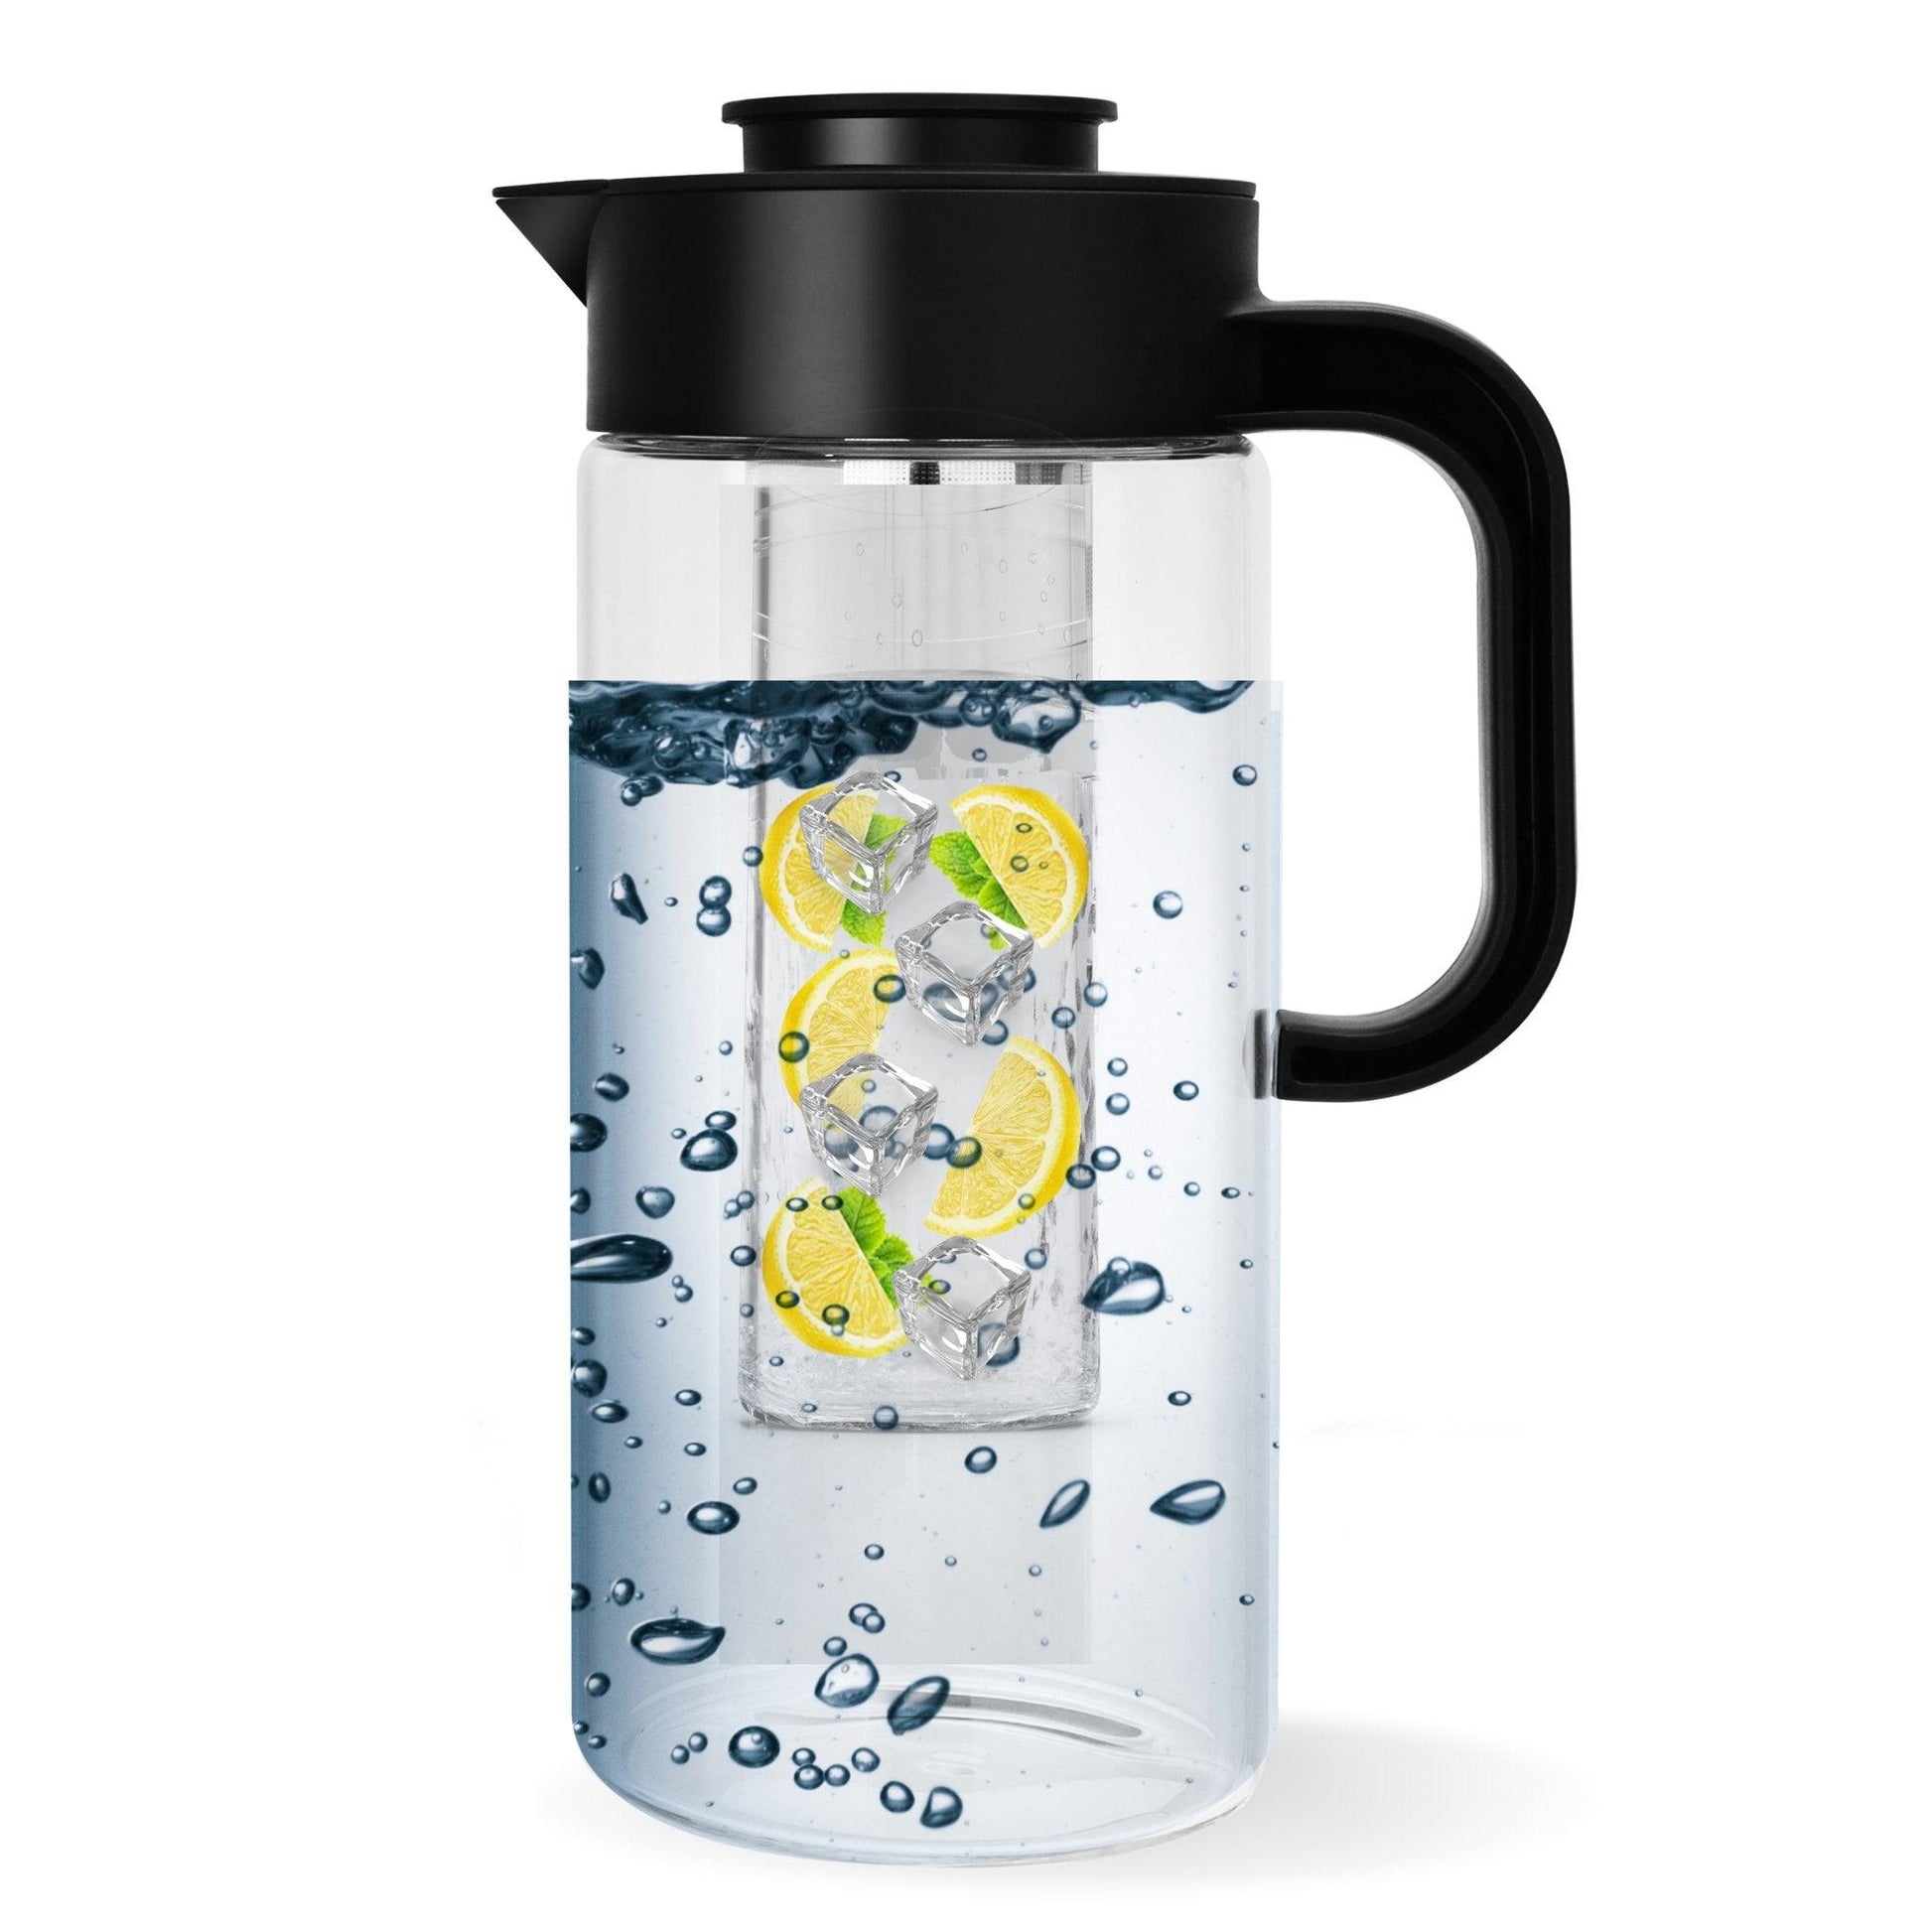 Water Pitcher With Lid Drink Pitcher With Removable Lid And Wide